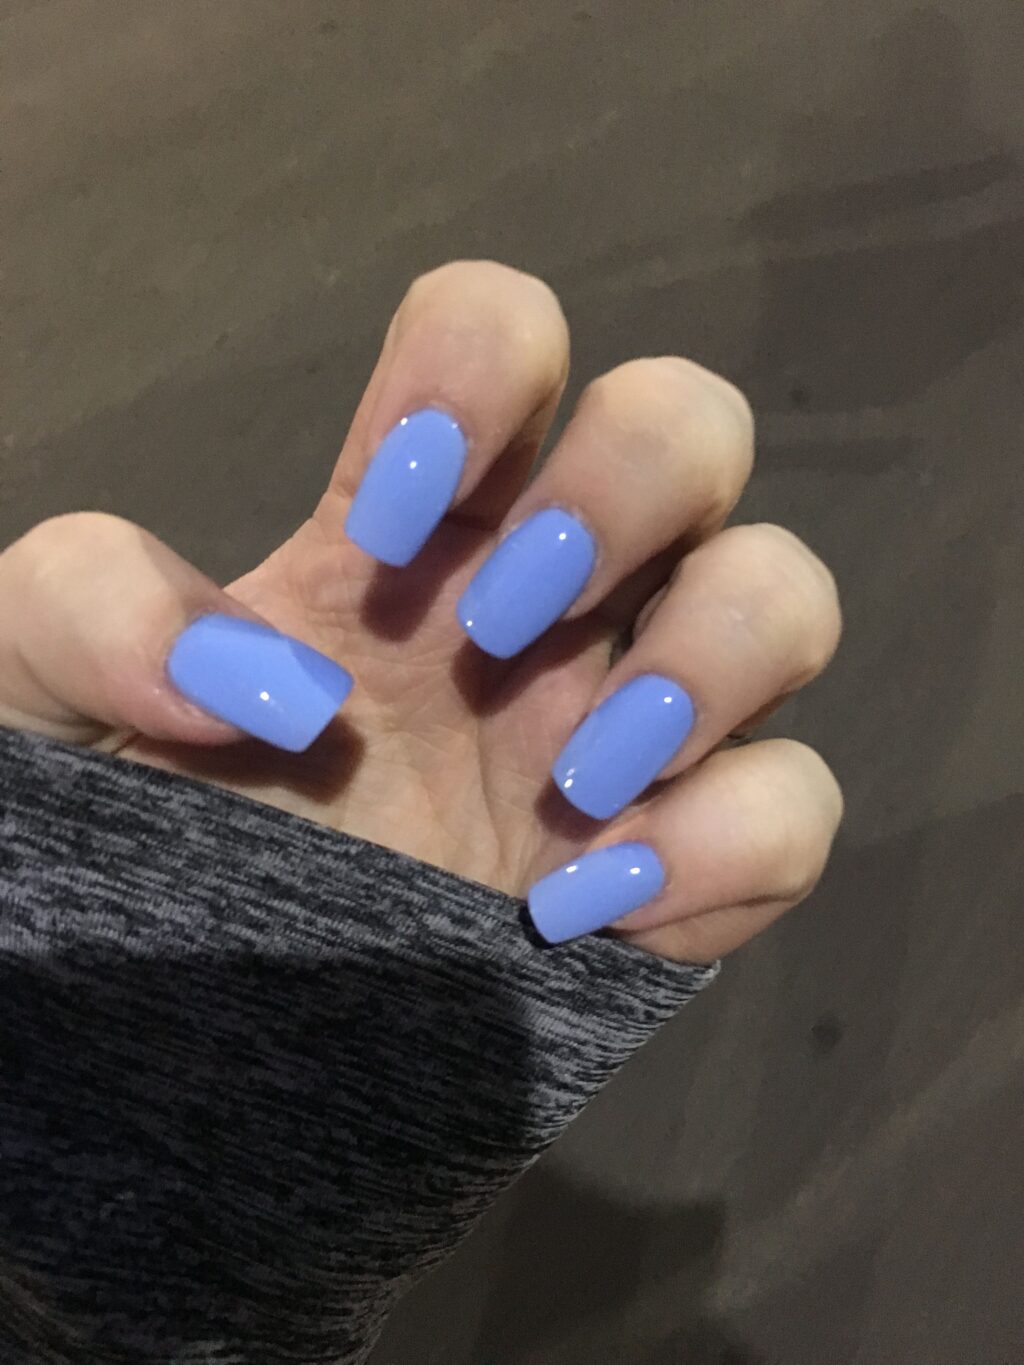 Periwinkle Nails 1 Hottest 70+ Spring Nail Colors - 67